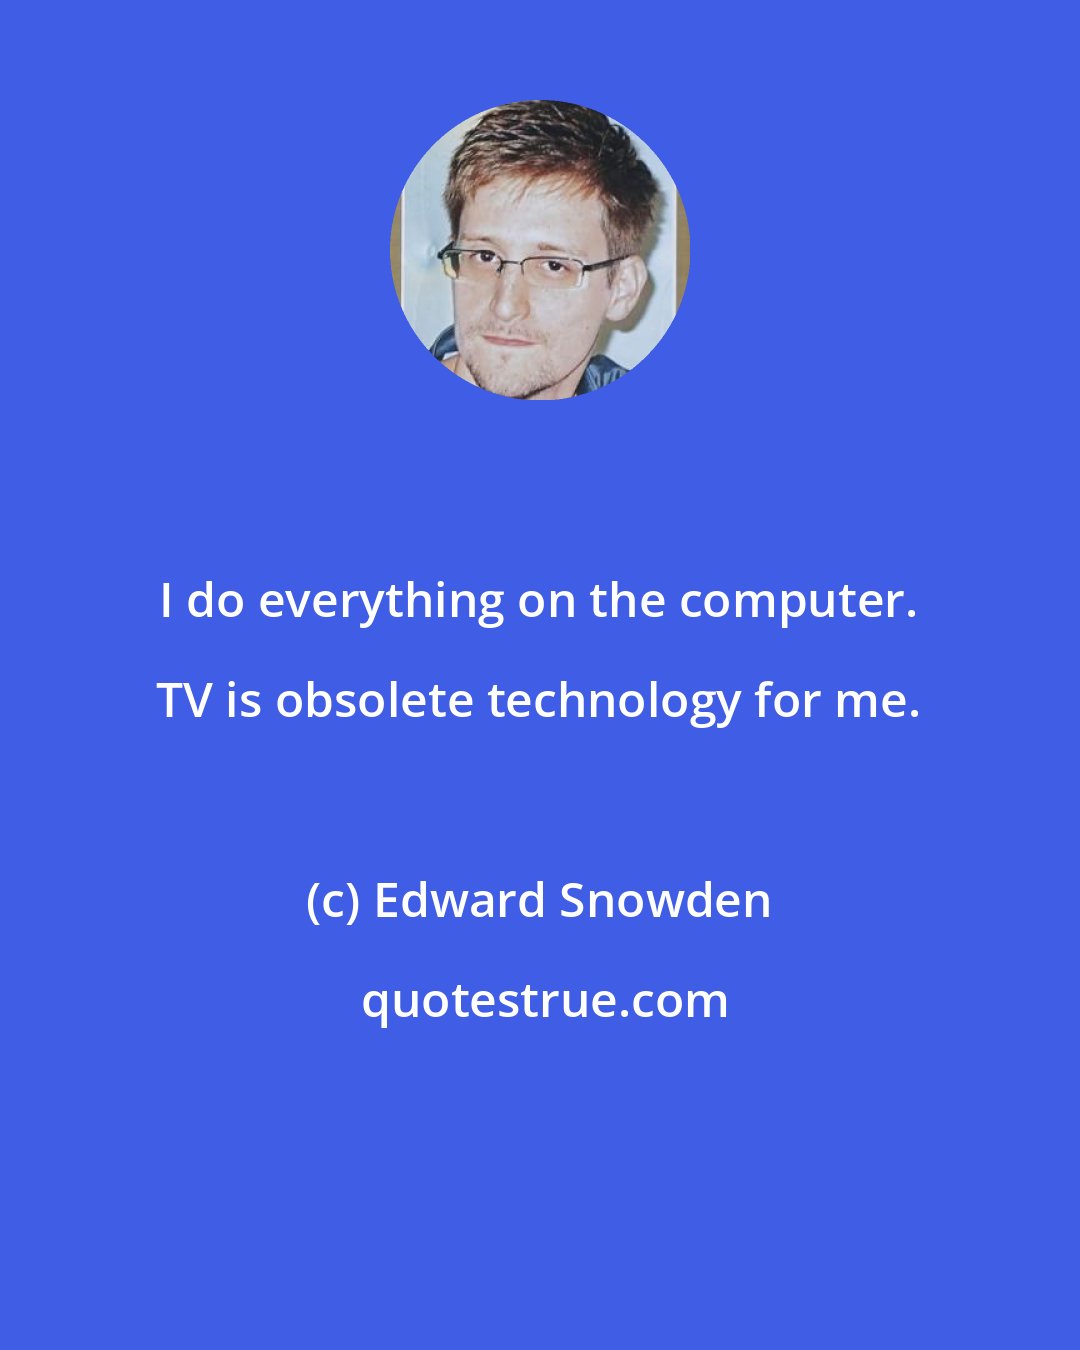 Edward Snowden: I do everything on the computer. TV is obsolete technology for me.